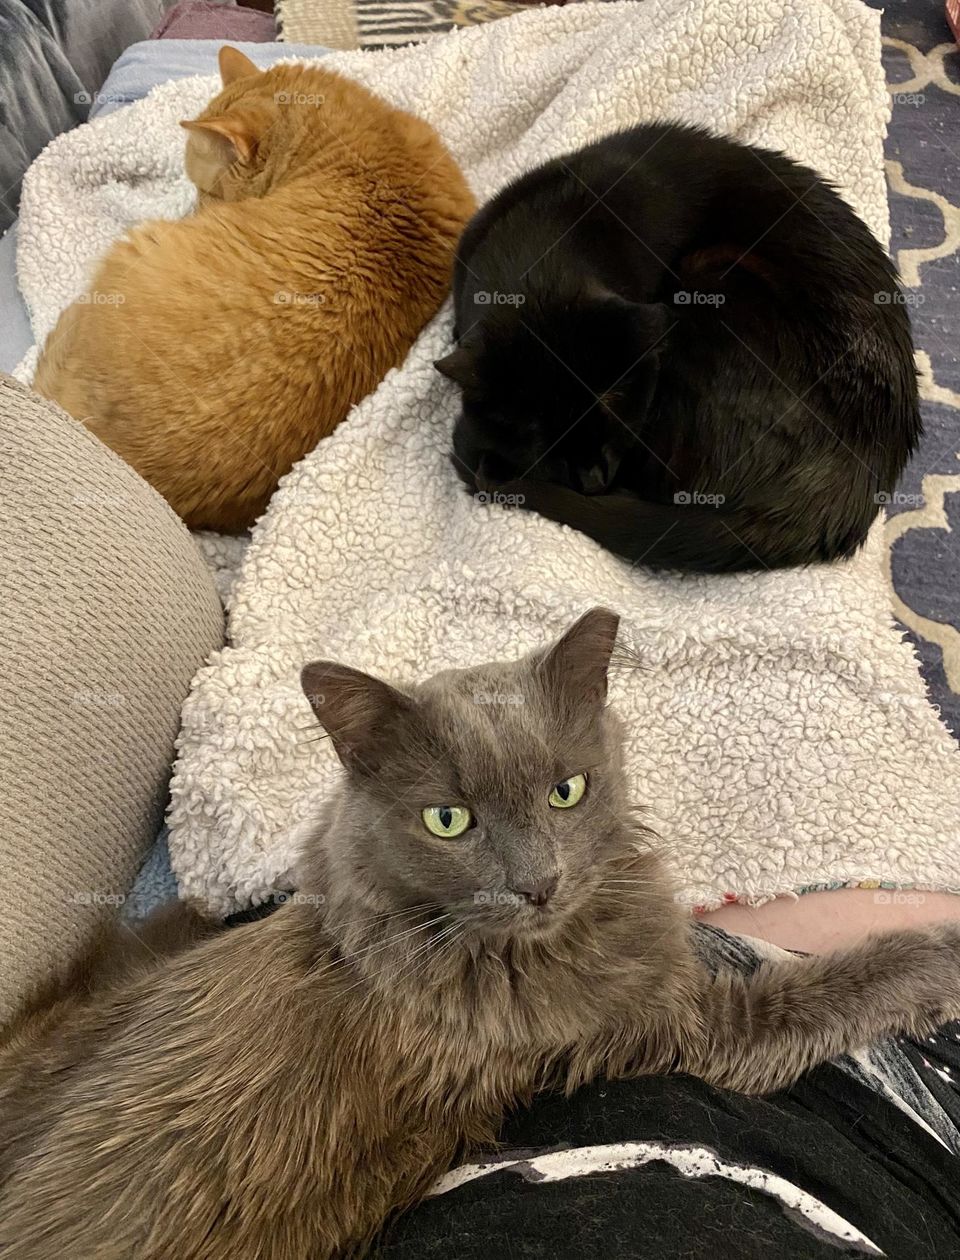 Three cats sitting together in a blanket with their person